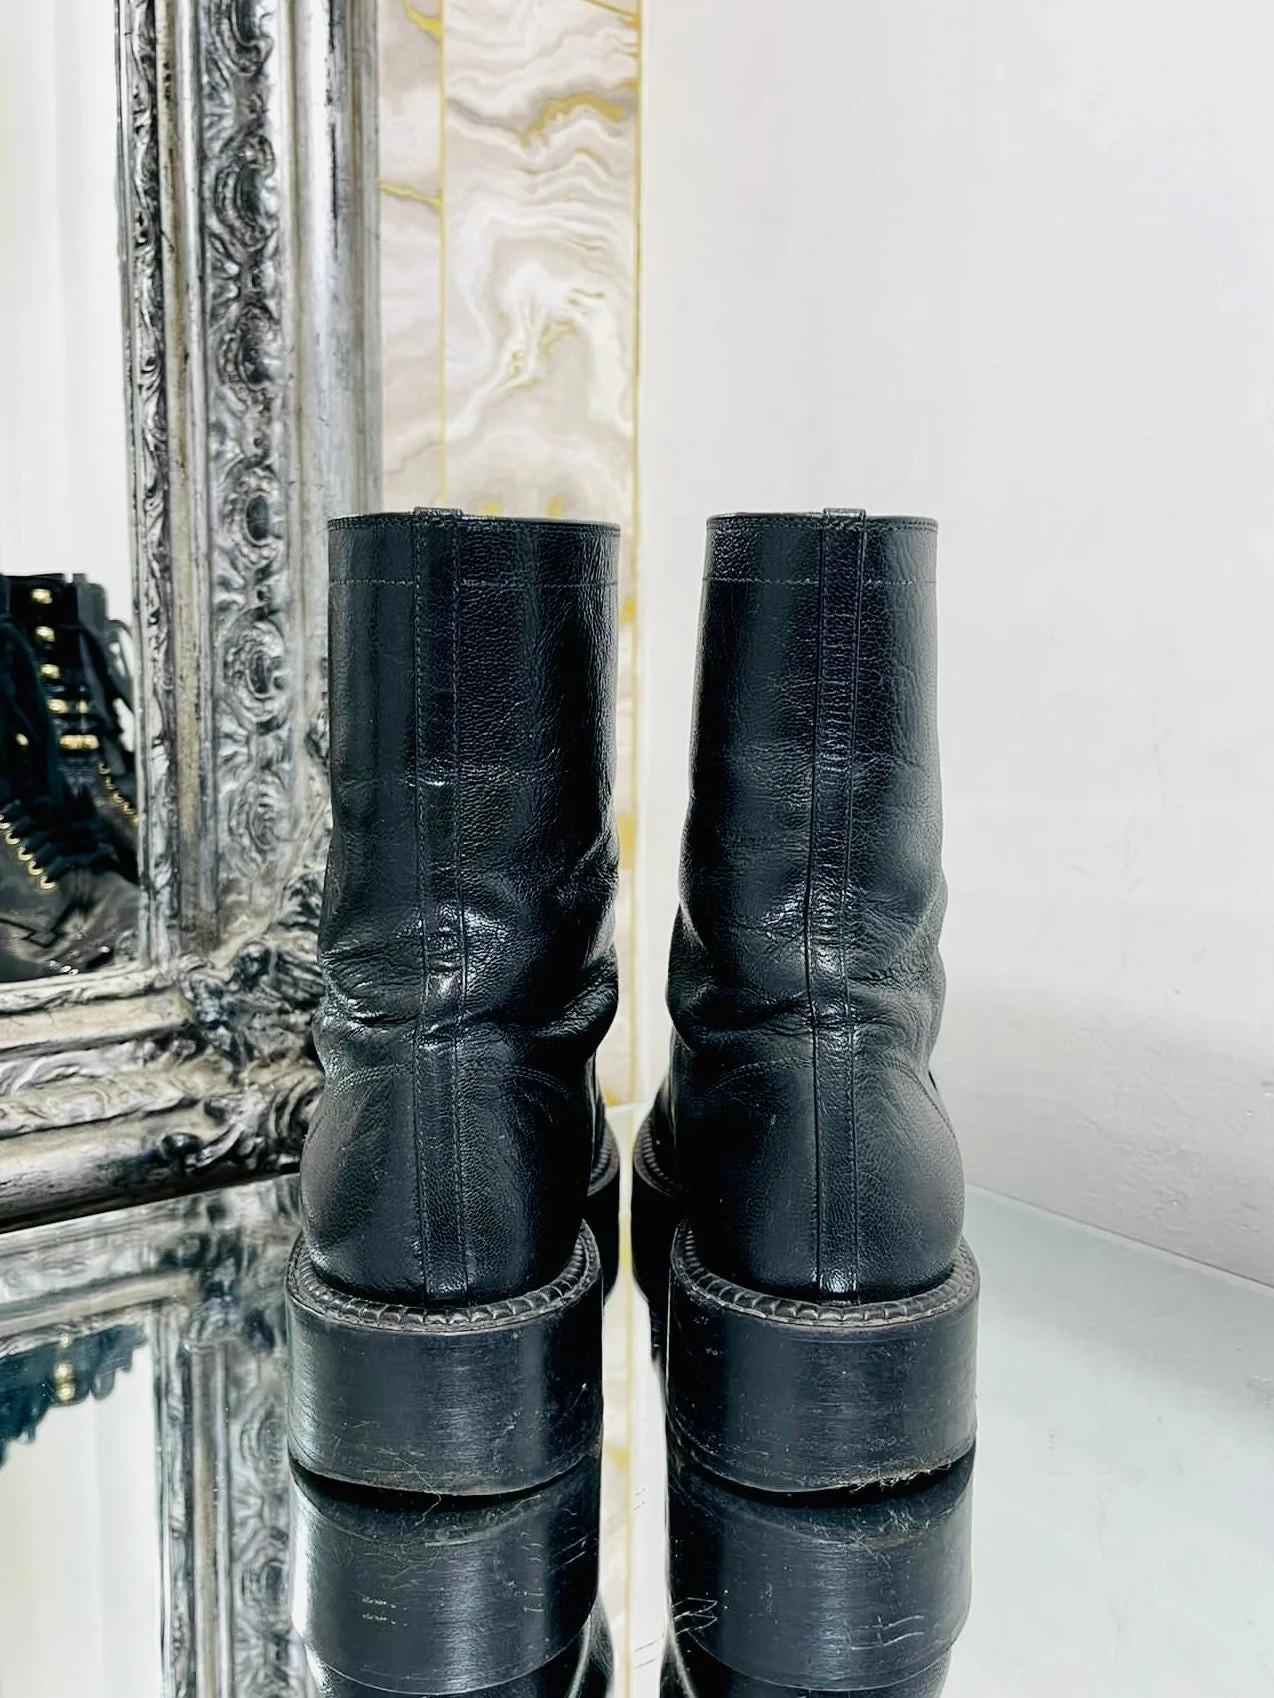 Chanel Utah Eagle Ankle Biker Boots In Good Condition For Sale In London, GB